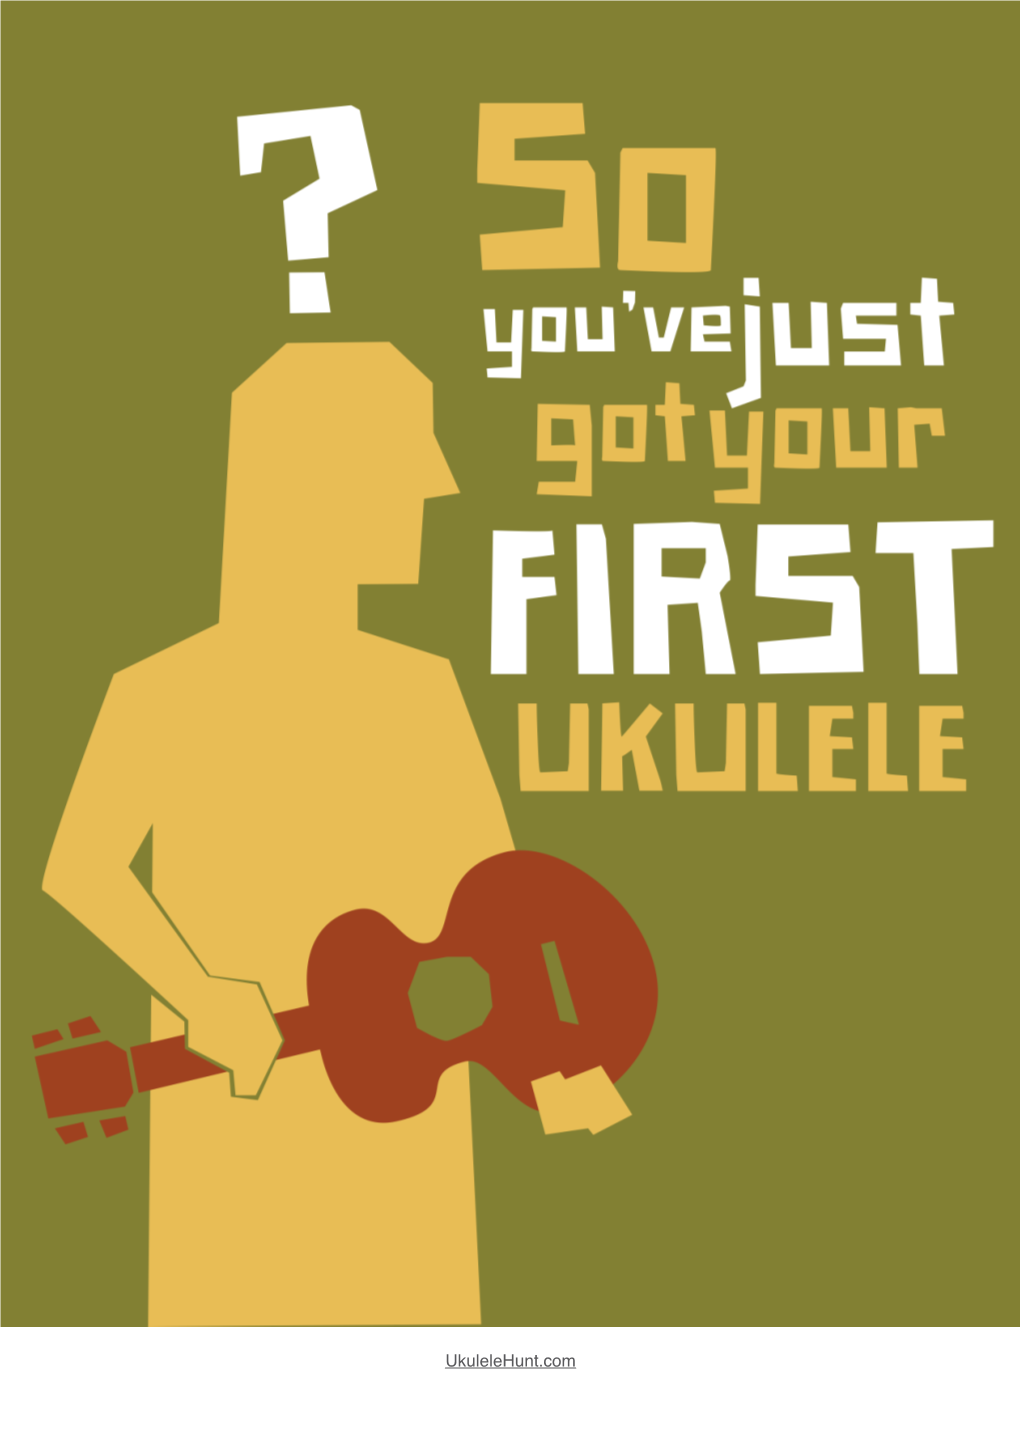 So You've Just Got Your First Ukulele